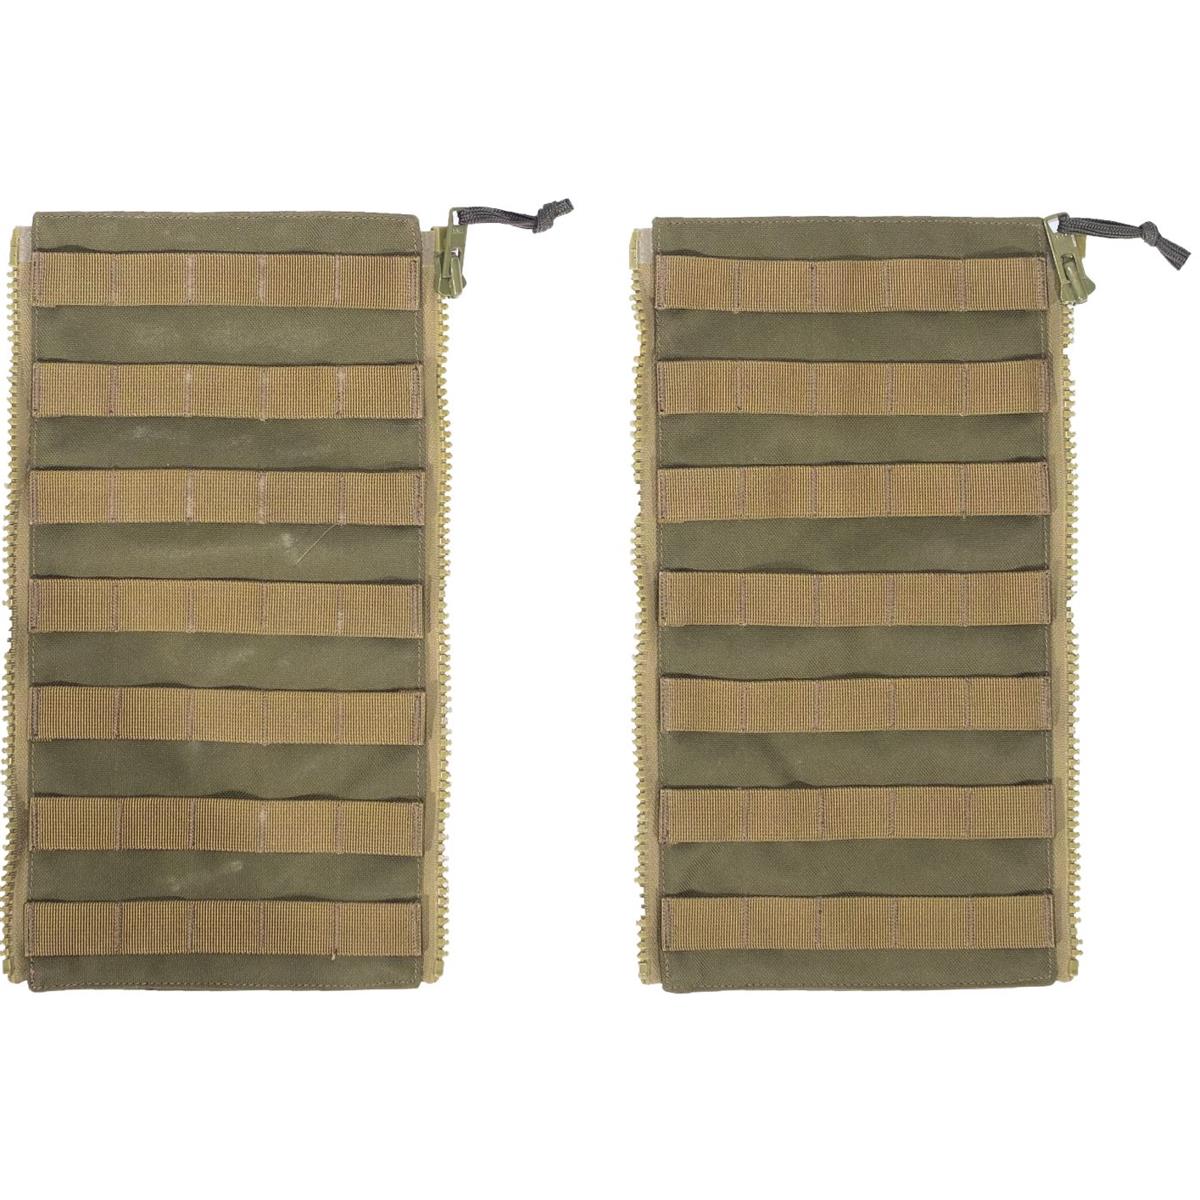 Berghaus MMPS Molle Pads